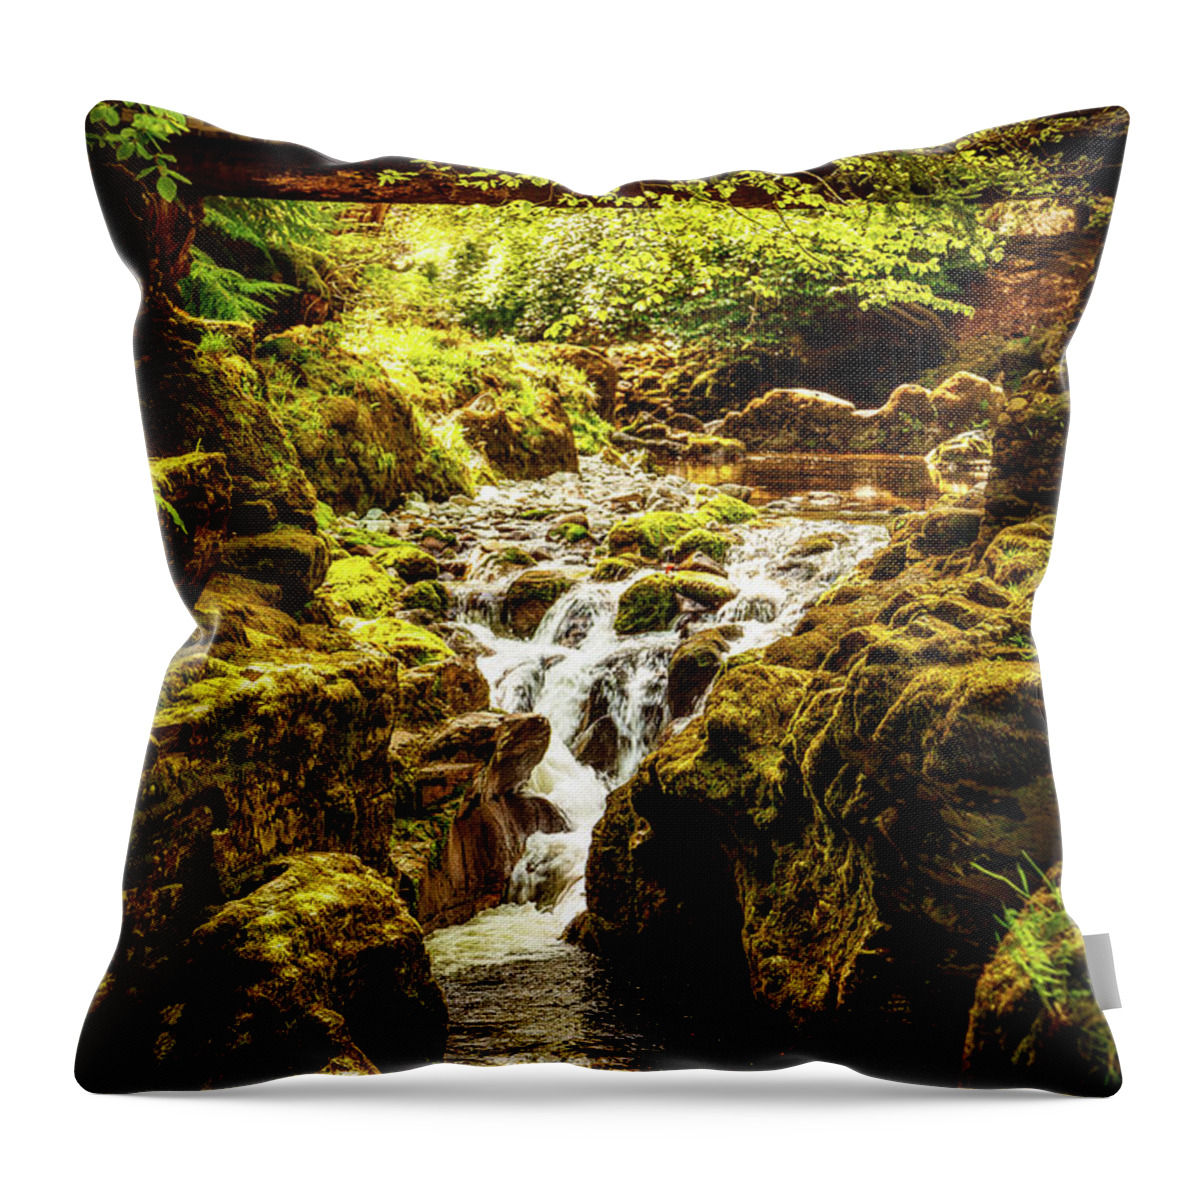 Shimna River Throw Pillow featuring the photograph Bridge over the Shimna River by Bradley Morris